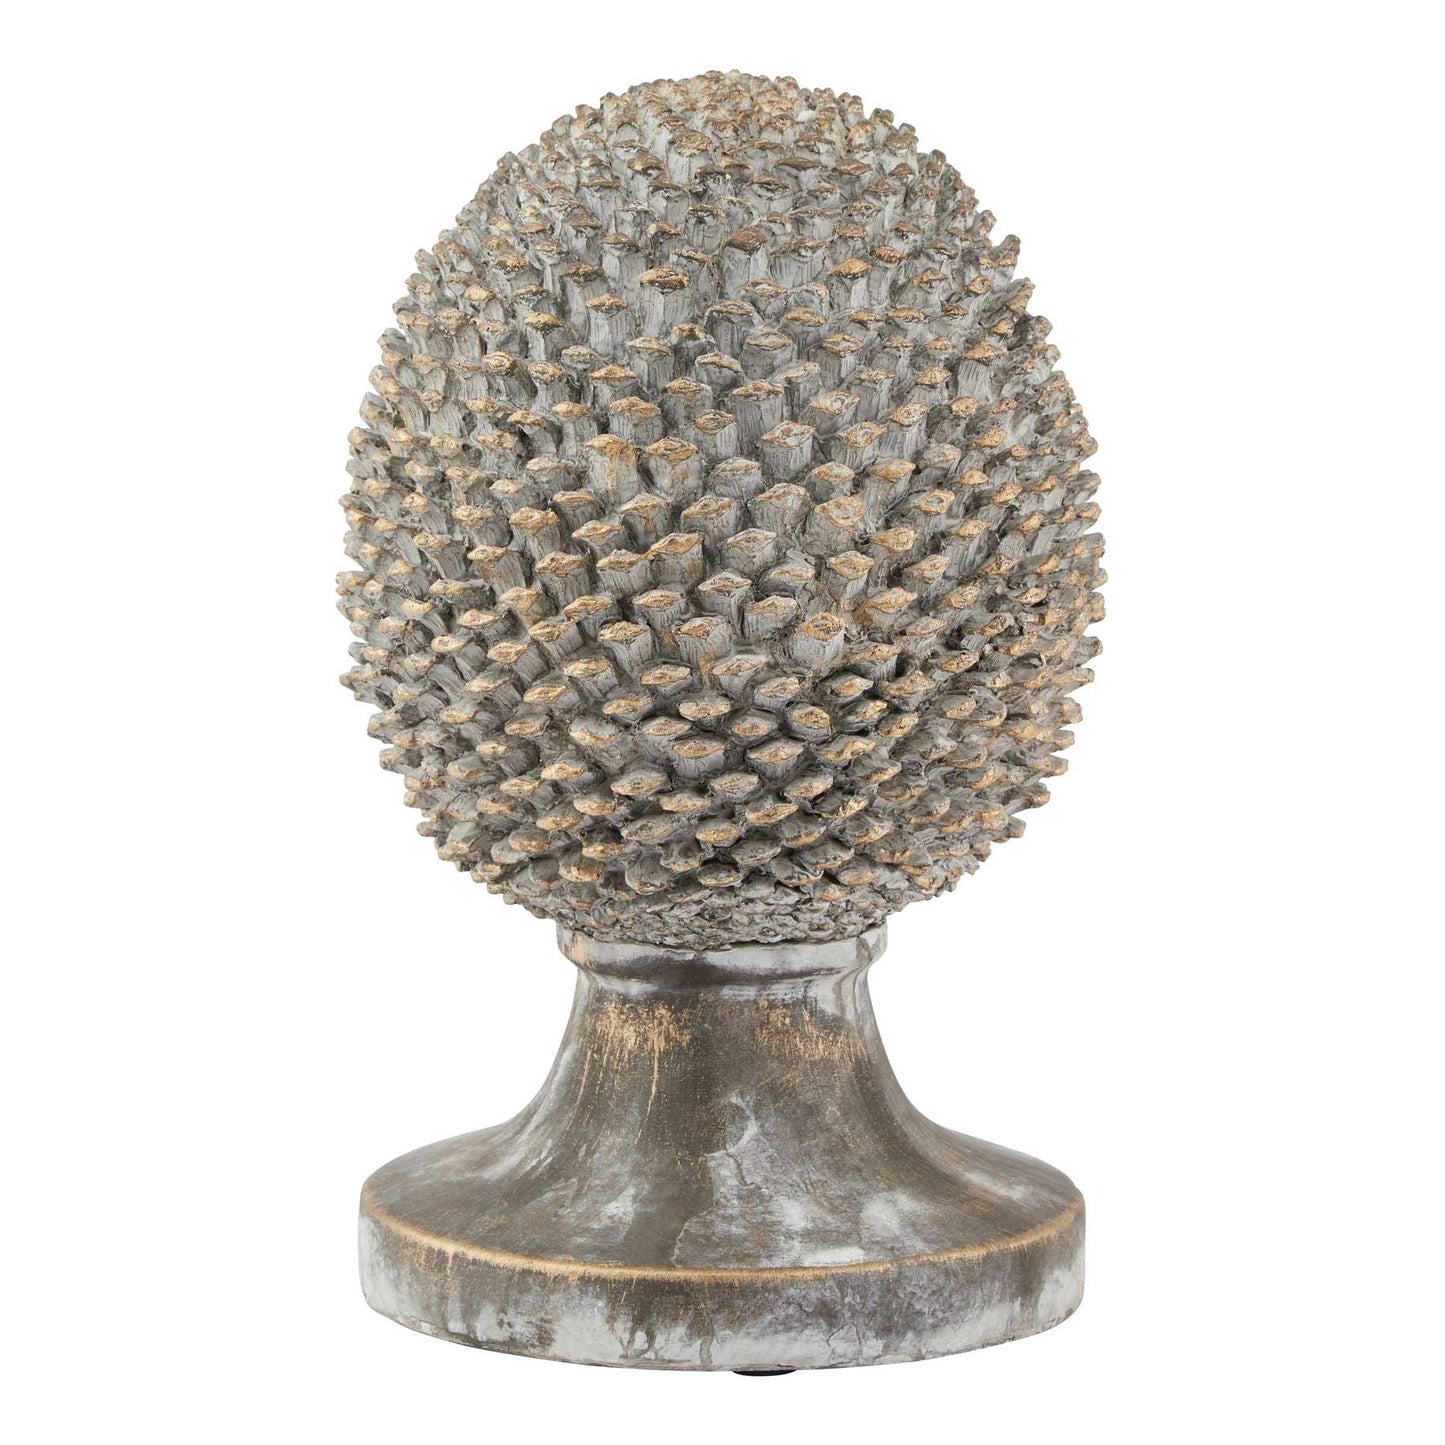 Large Stone Effect Pinecone Ornament With Gold Accents - Ashton and Finch